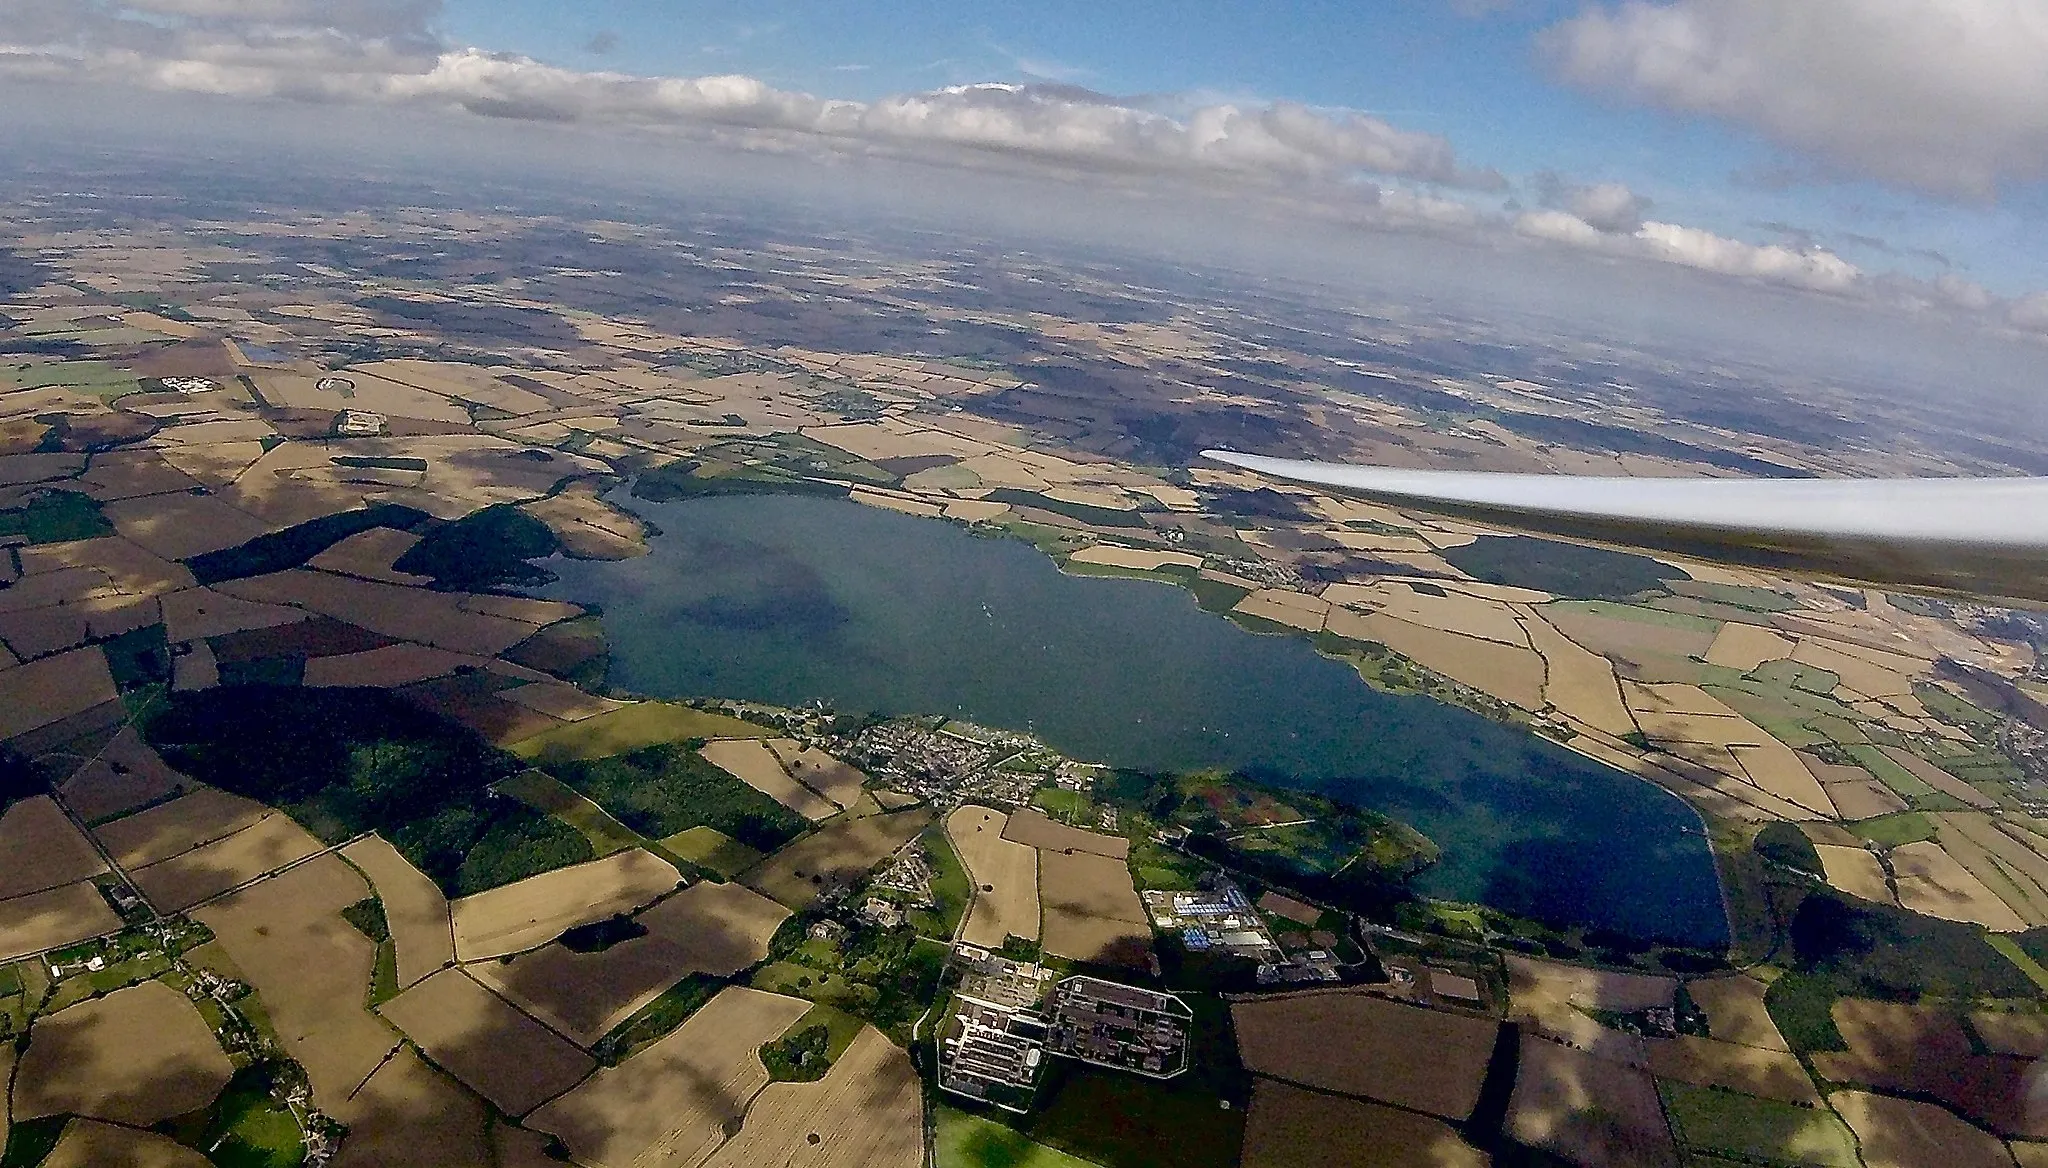 Photo showing: The Grafham Water reservoir south-west of Huntingdon in Cambridgeshire, UK